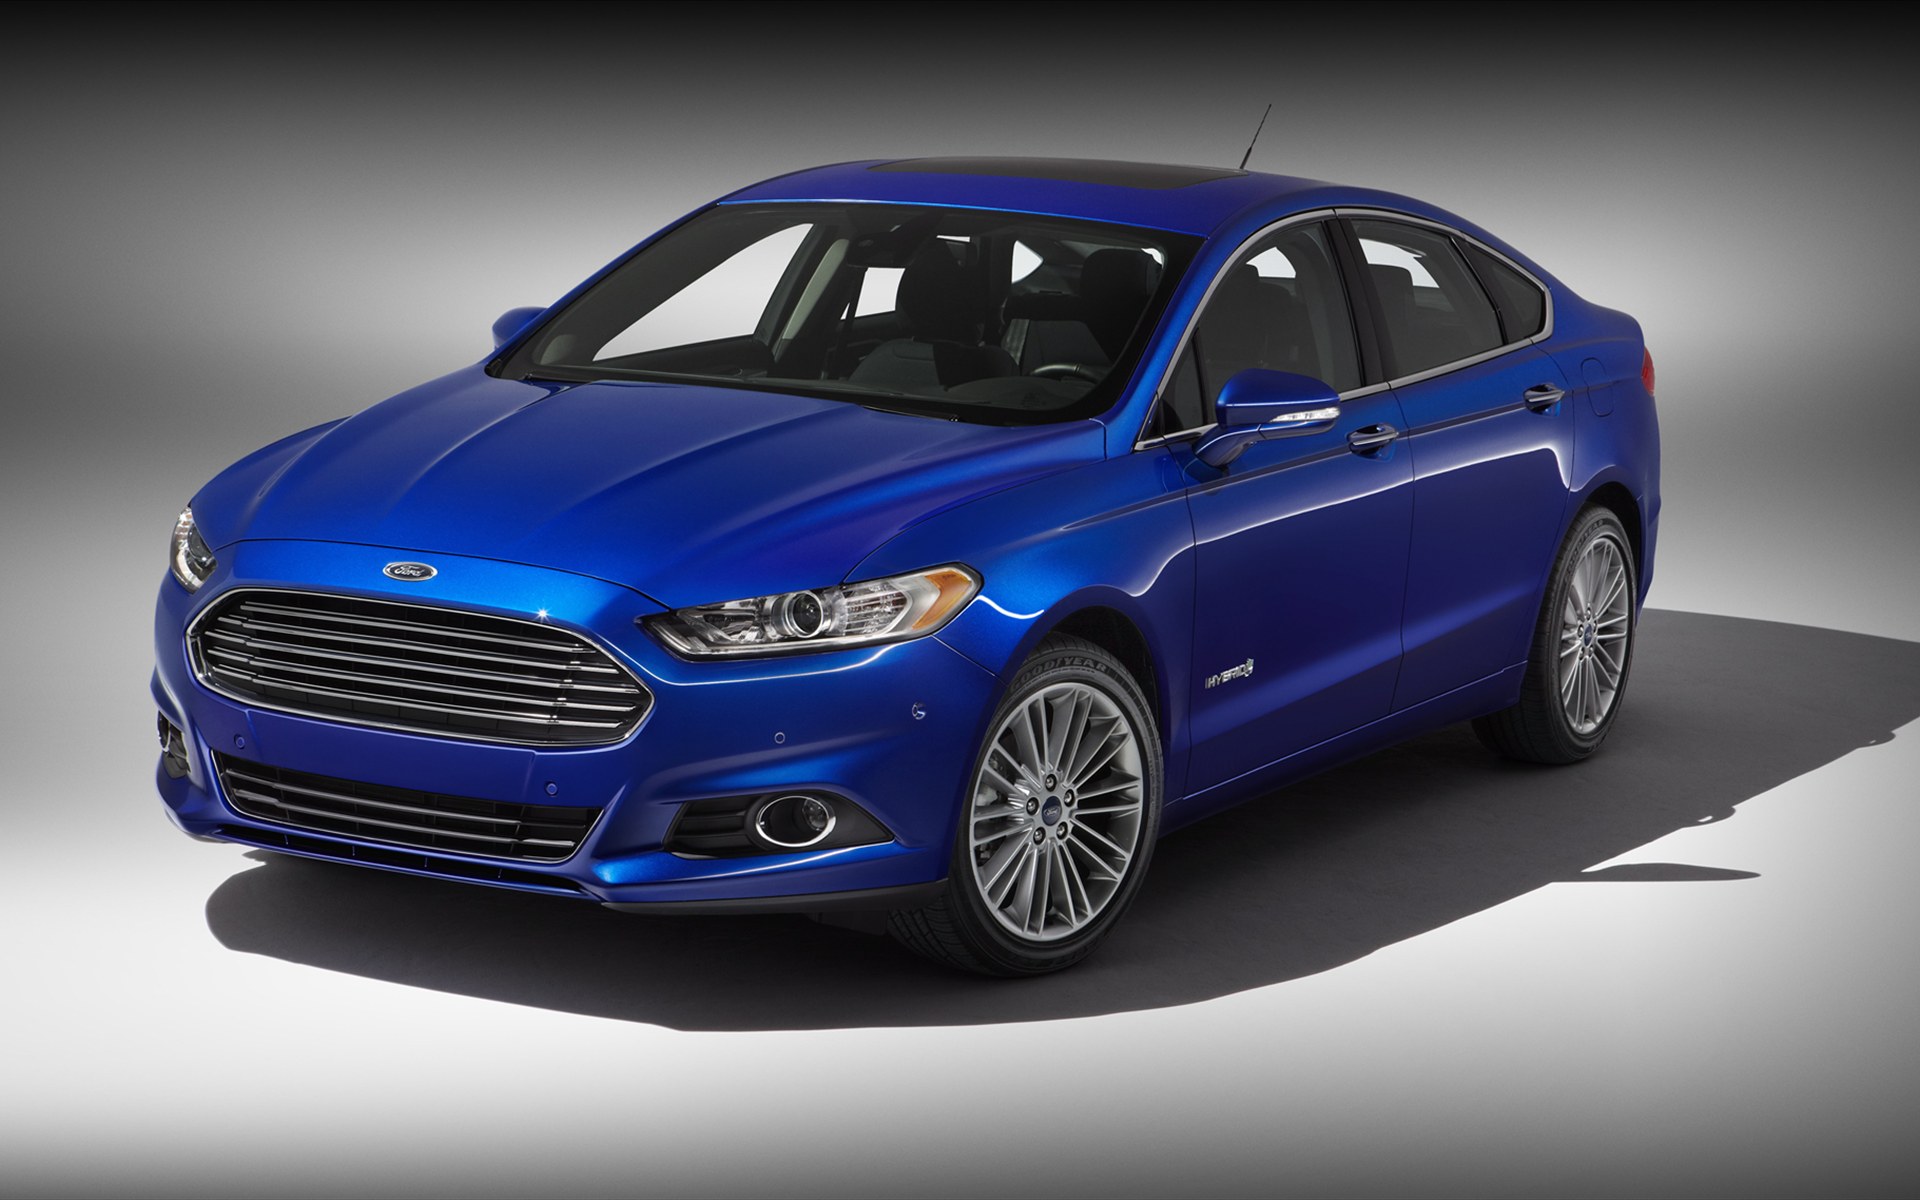 Ford Fusion Hd Wallpaper Background Image 1920x1200